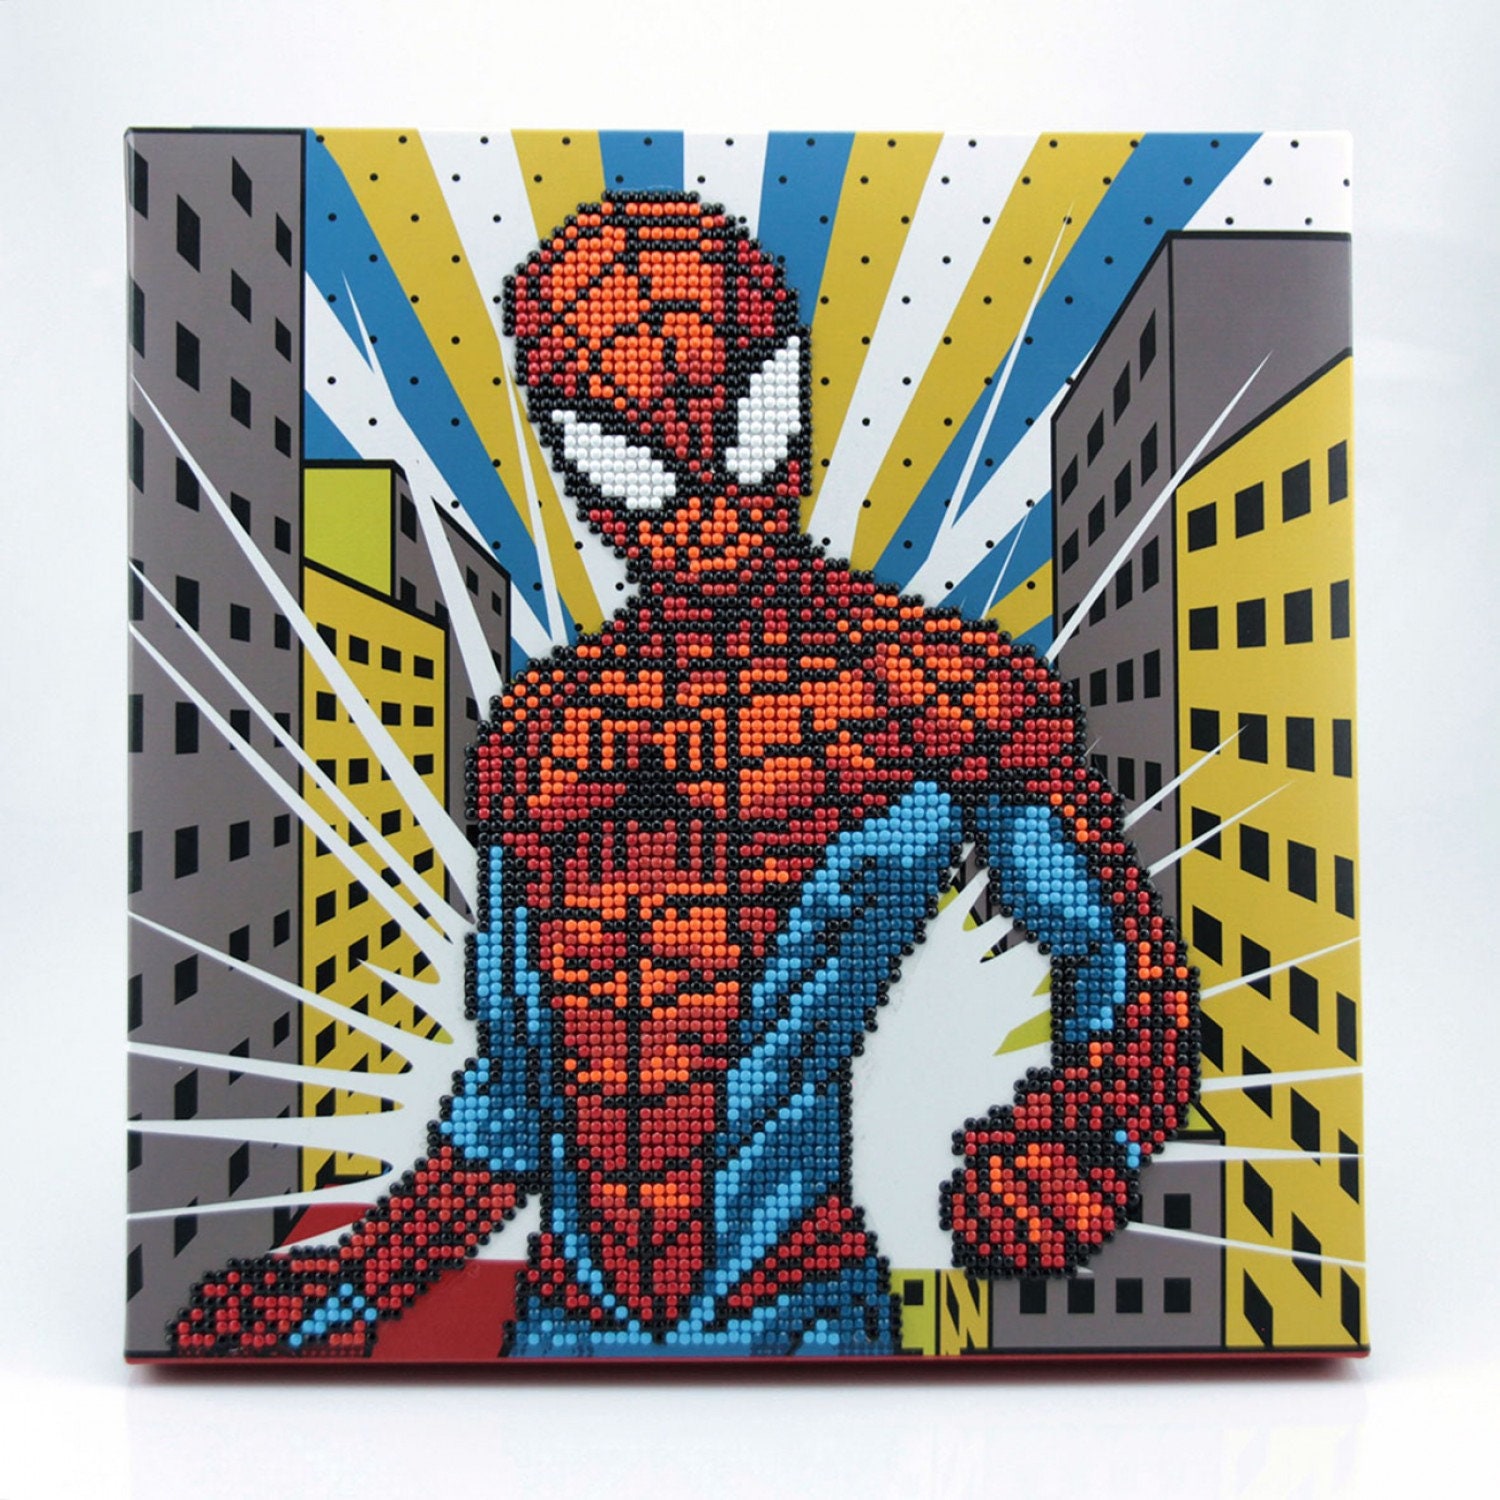 Diamond Painting - Spiderman in Action 